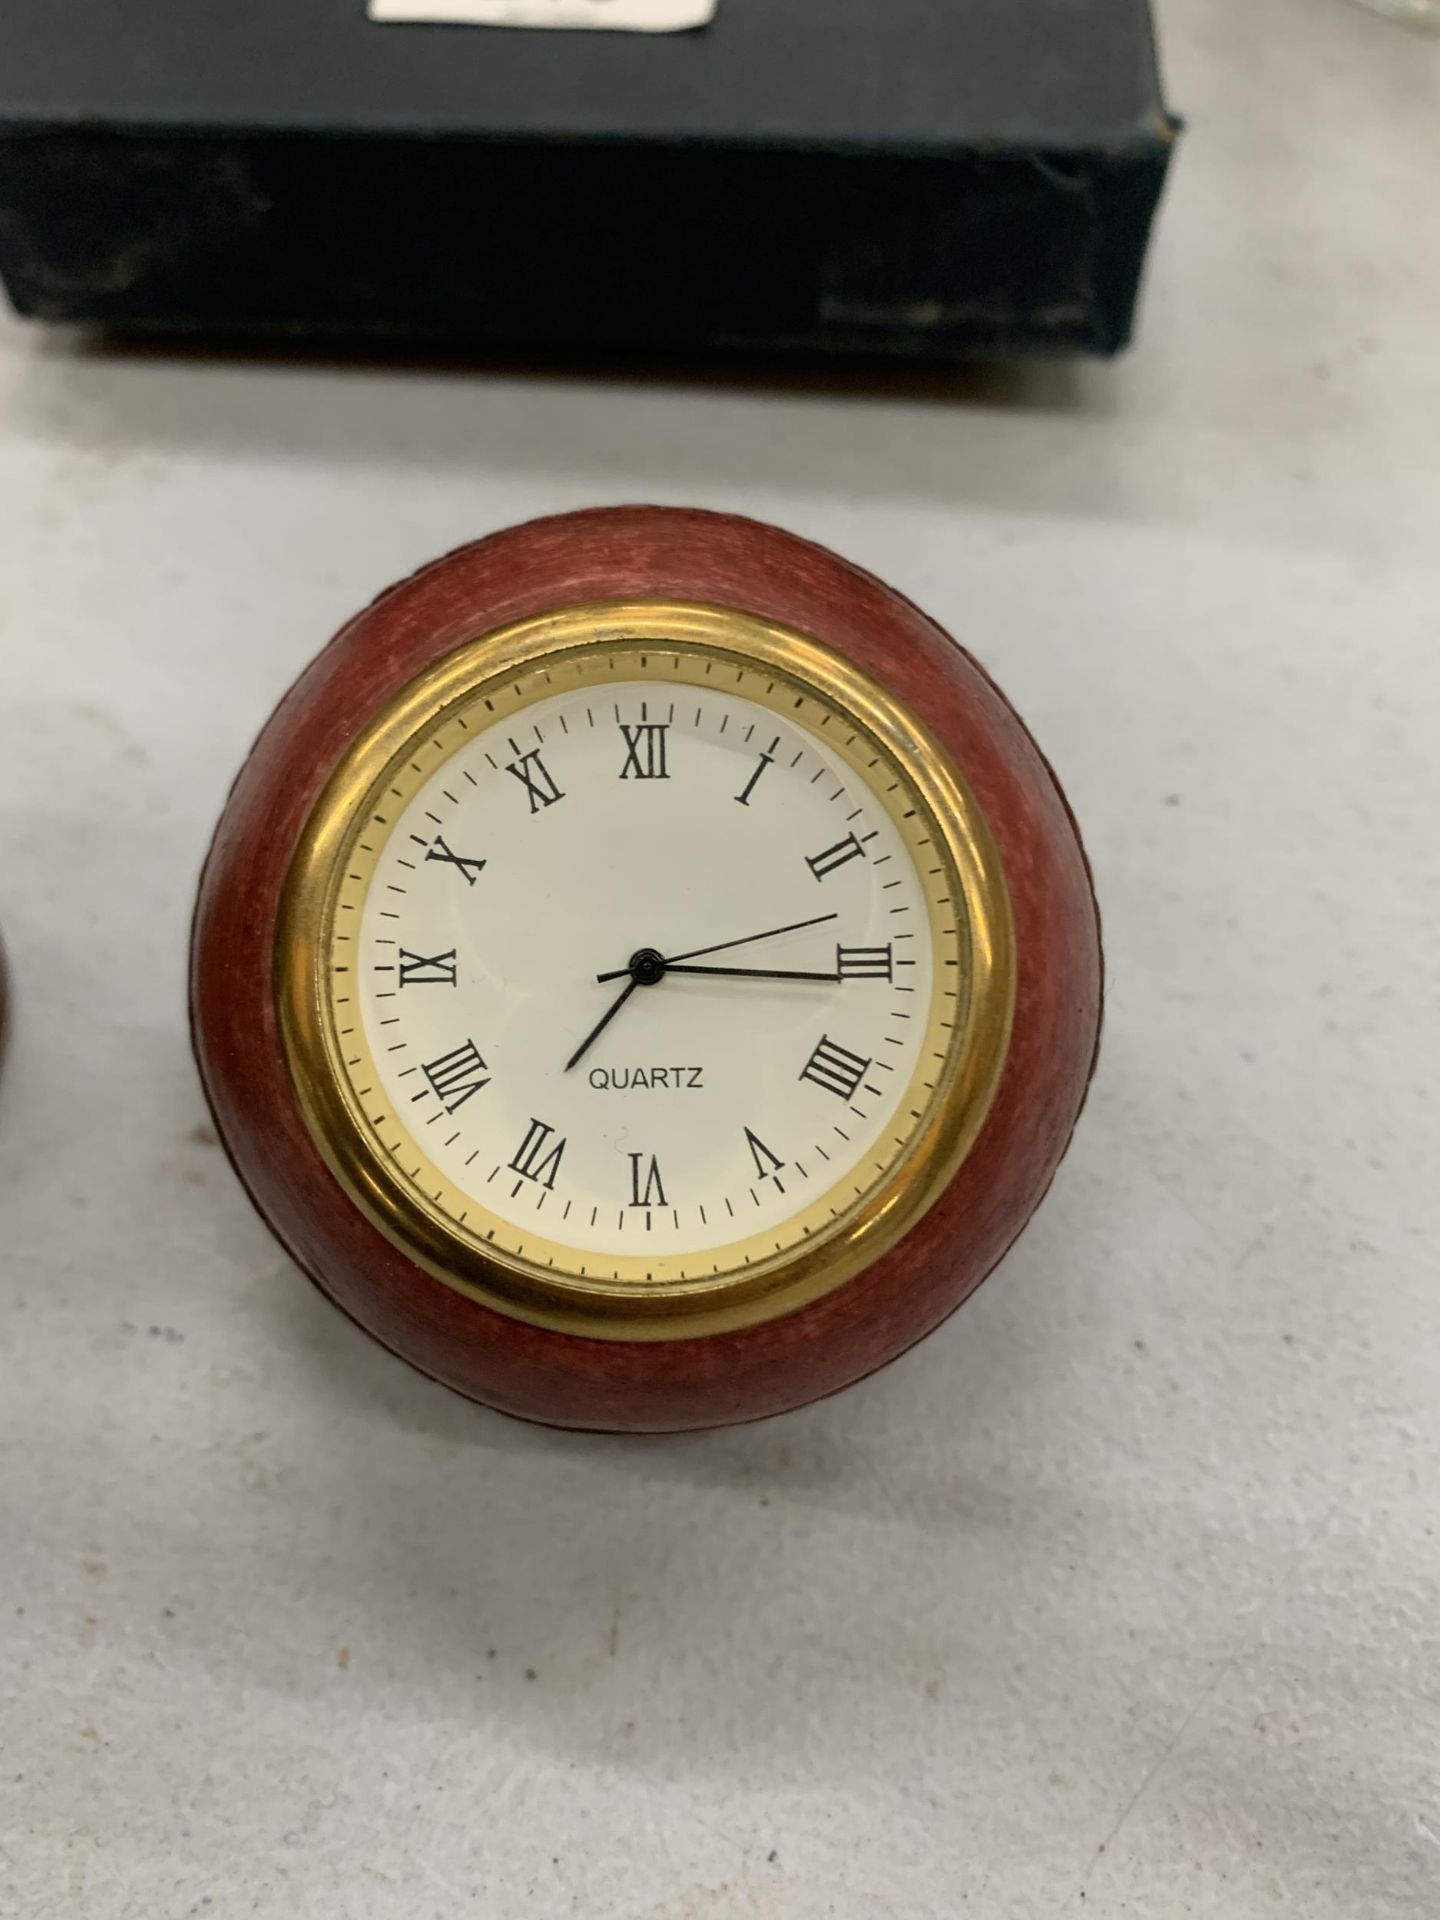 TWO HISTORY CRAFT DESK CLOCKS IN THE FORM OF A CRICKET BALL AND RUGBY BALL - Image 3 of 3